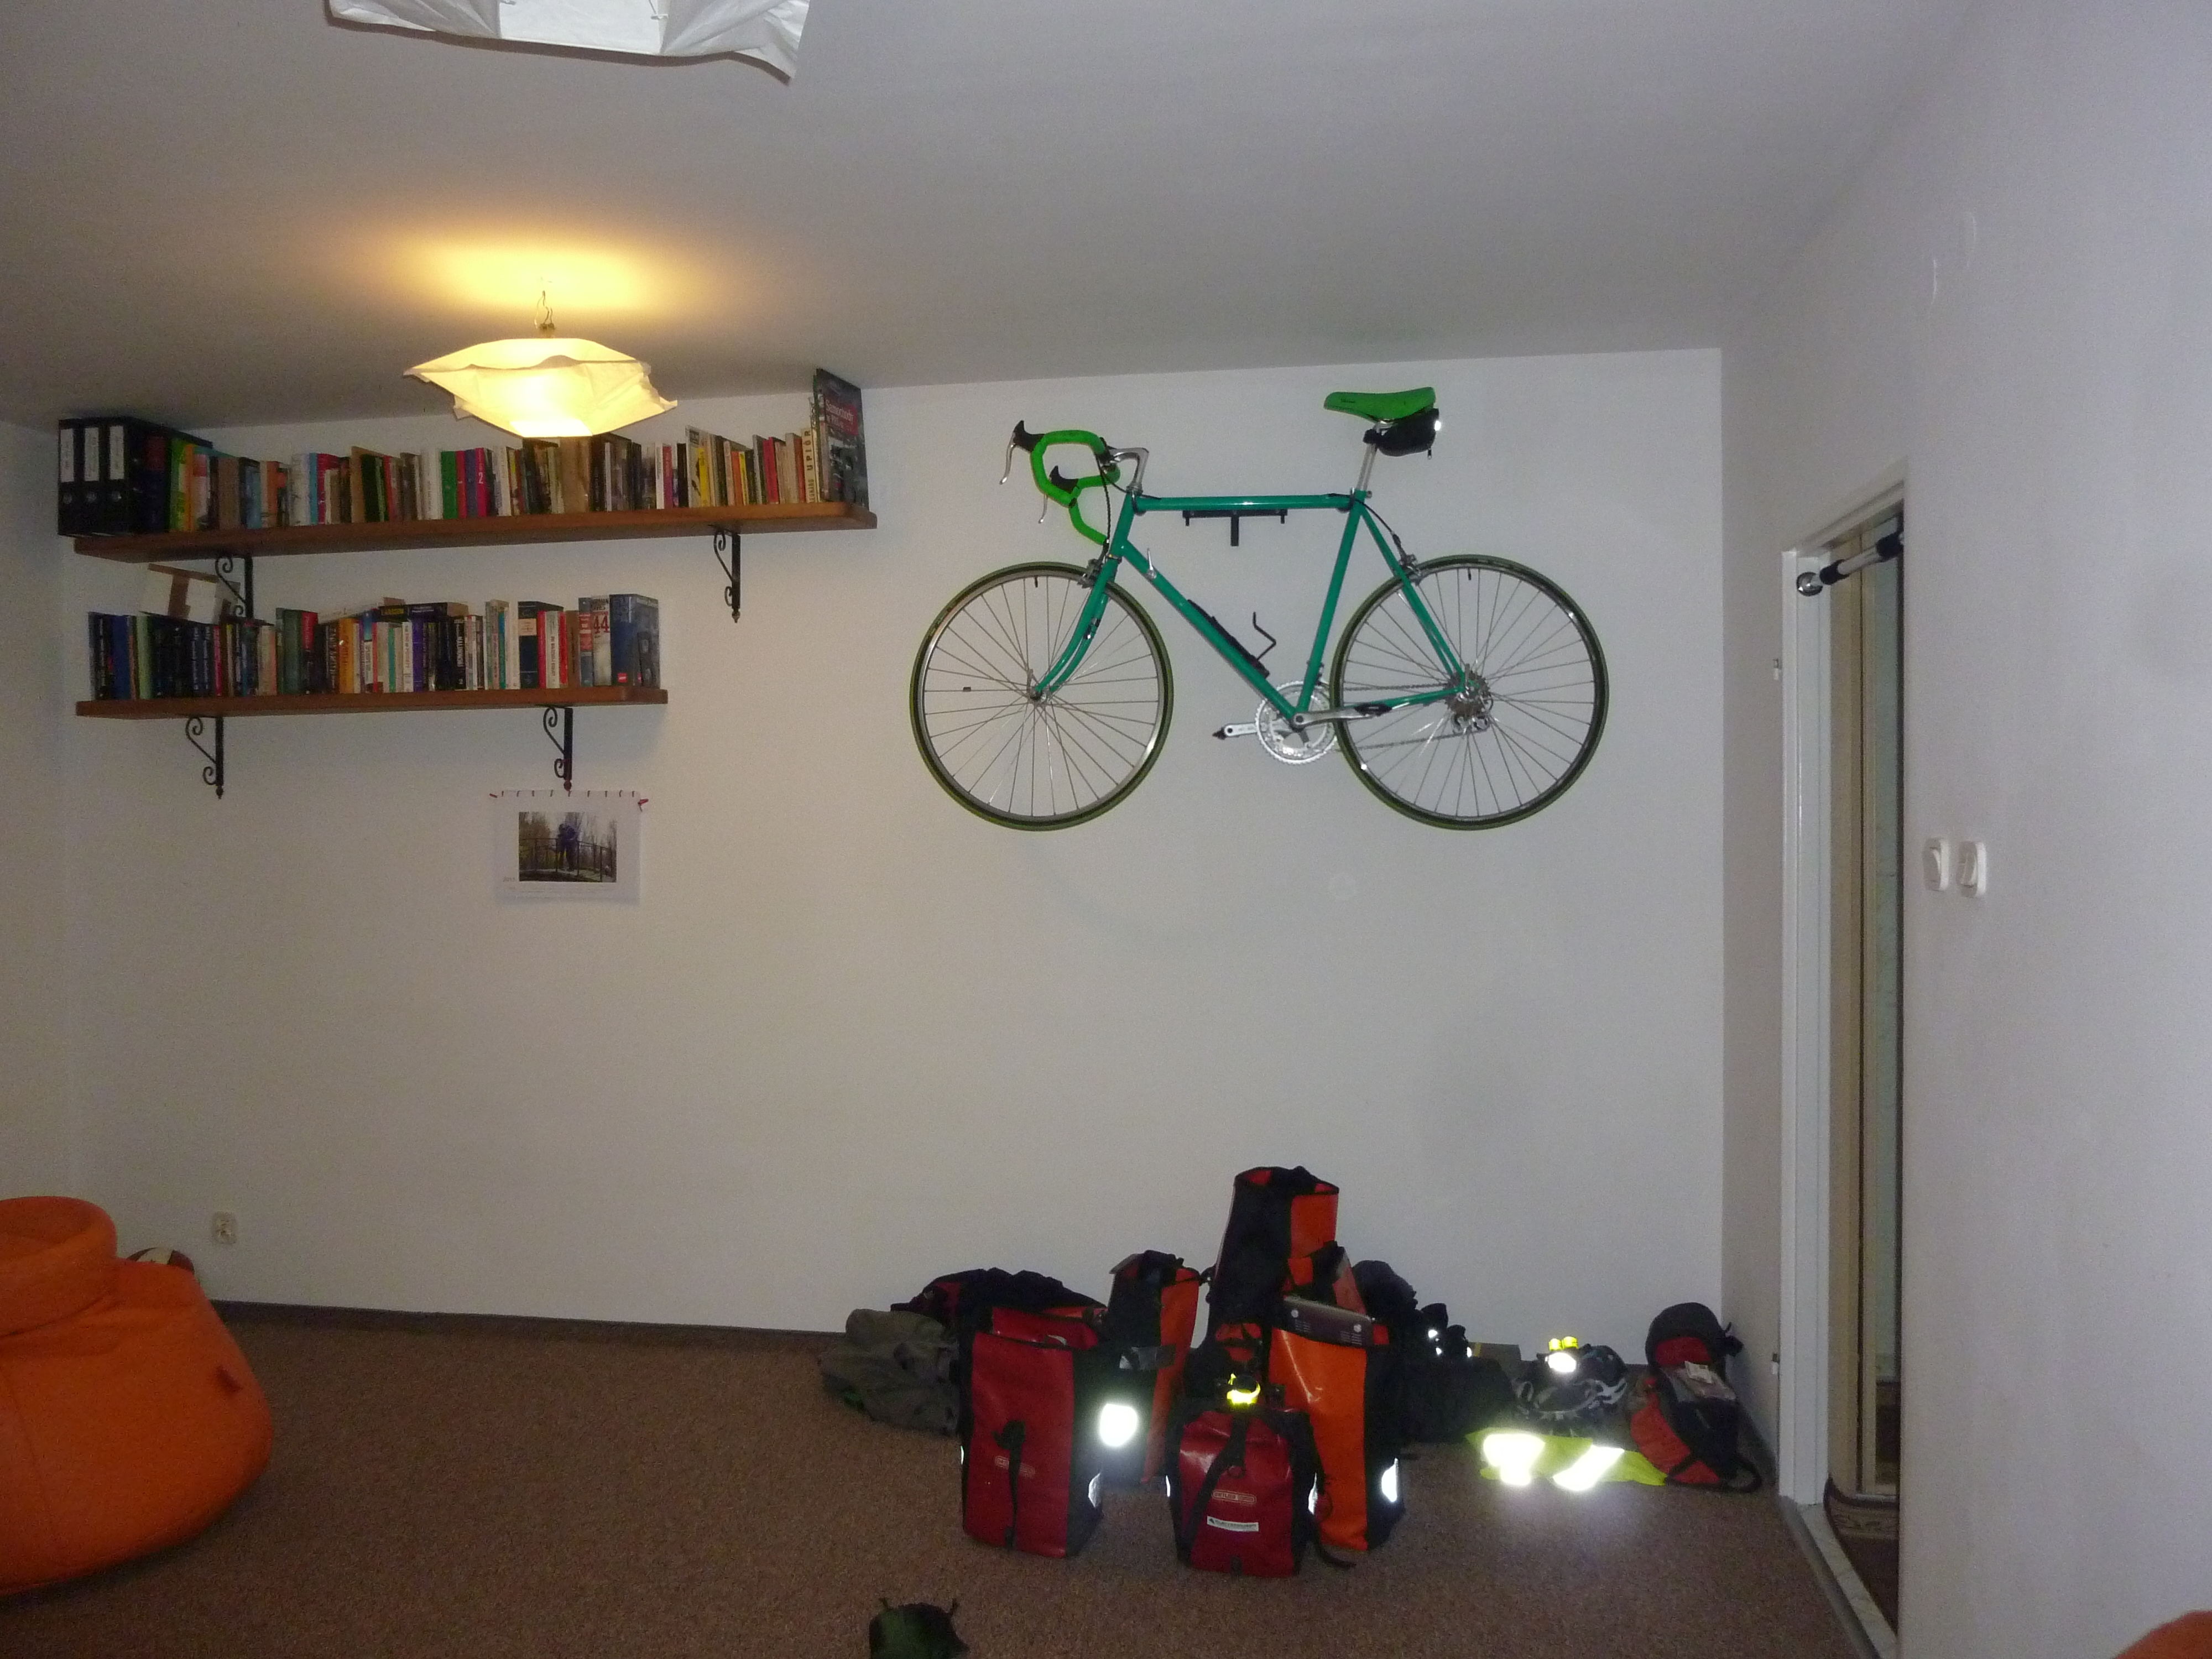 A true cyclist home with a bike on the wall and panniers on the floor.